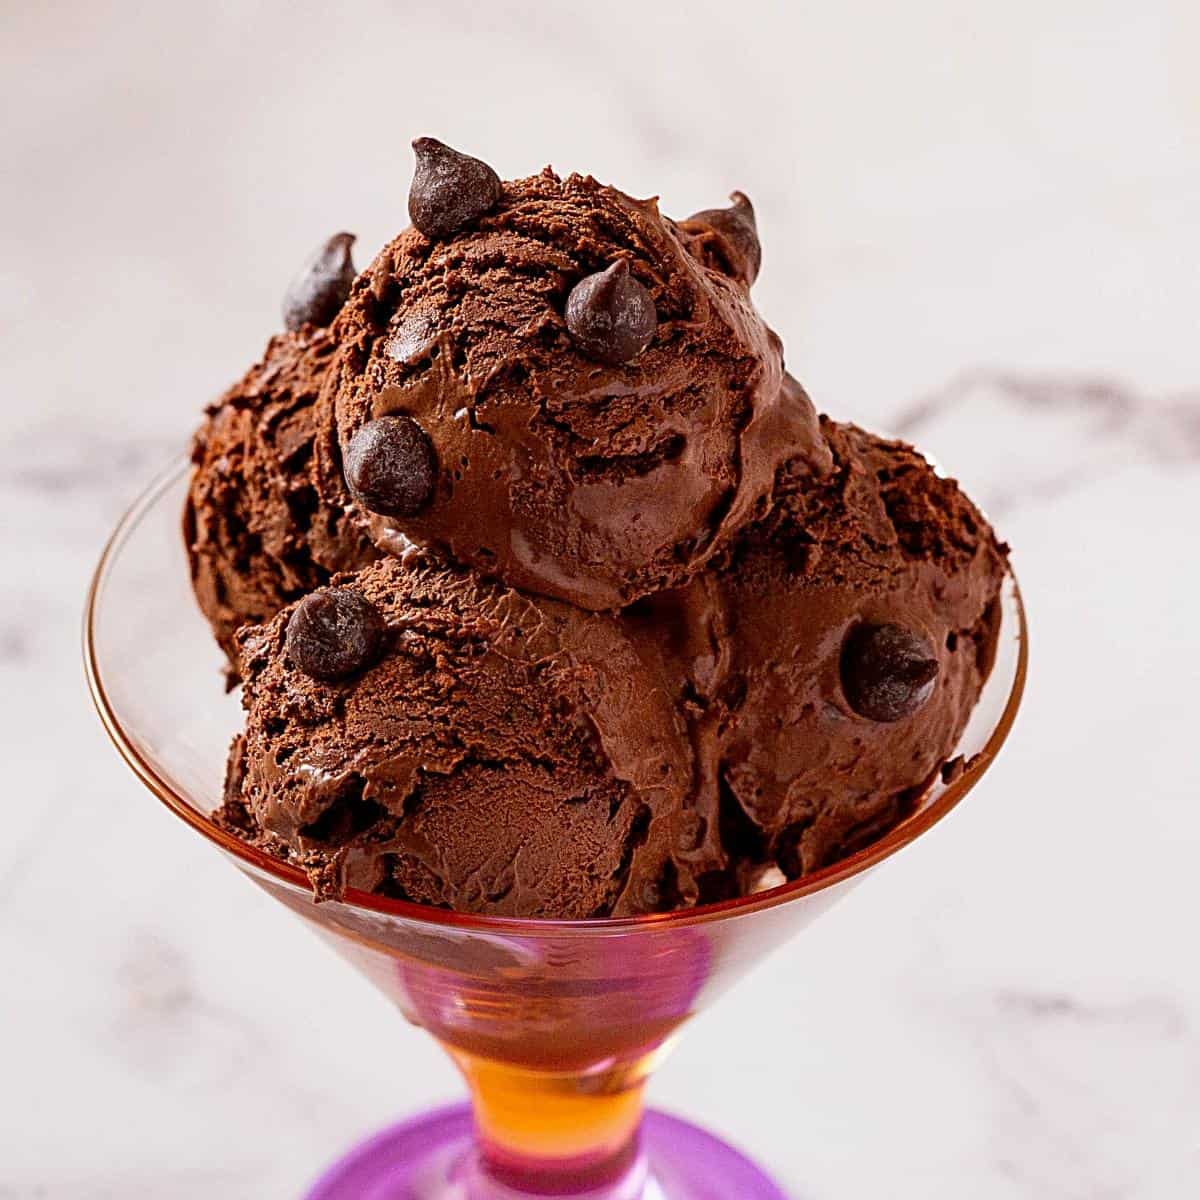 4 scoop of chocolate ice cream in a glass.